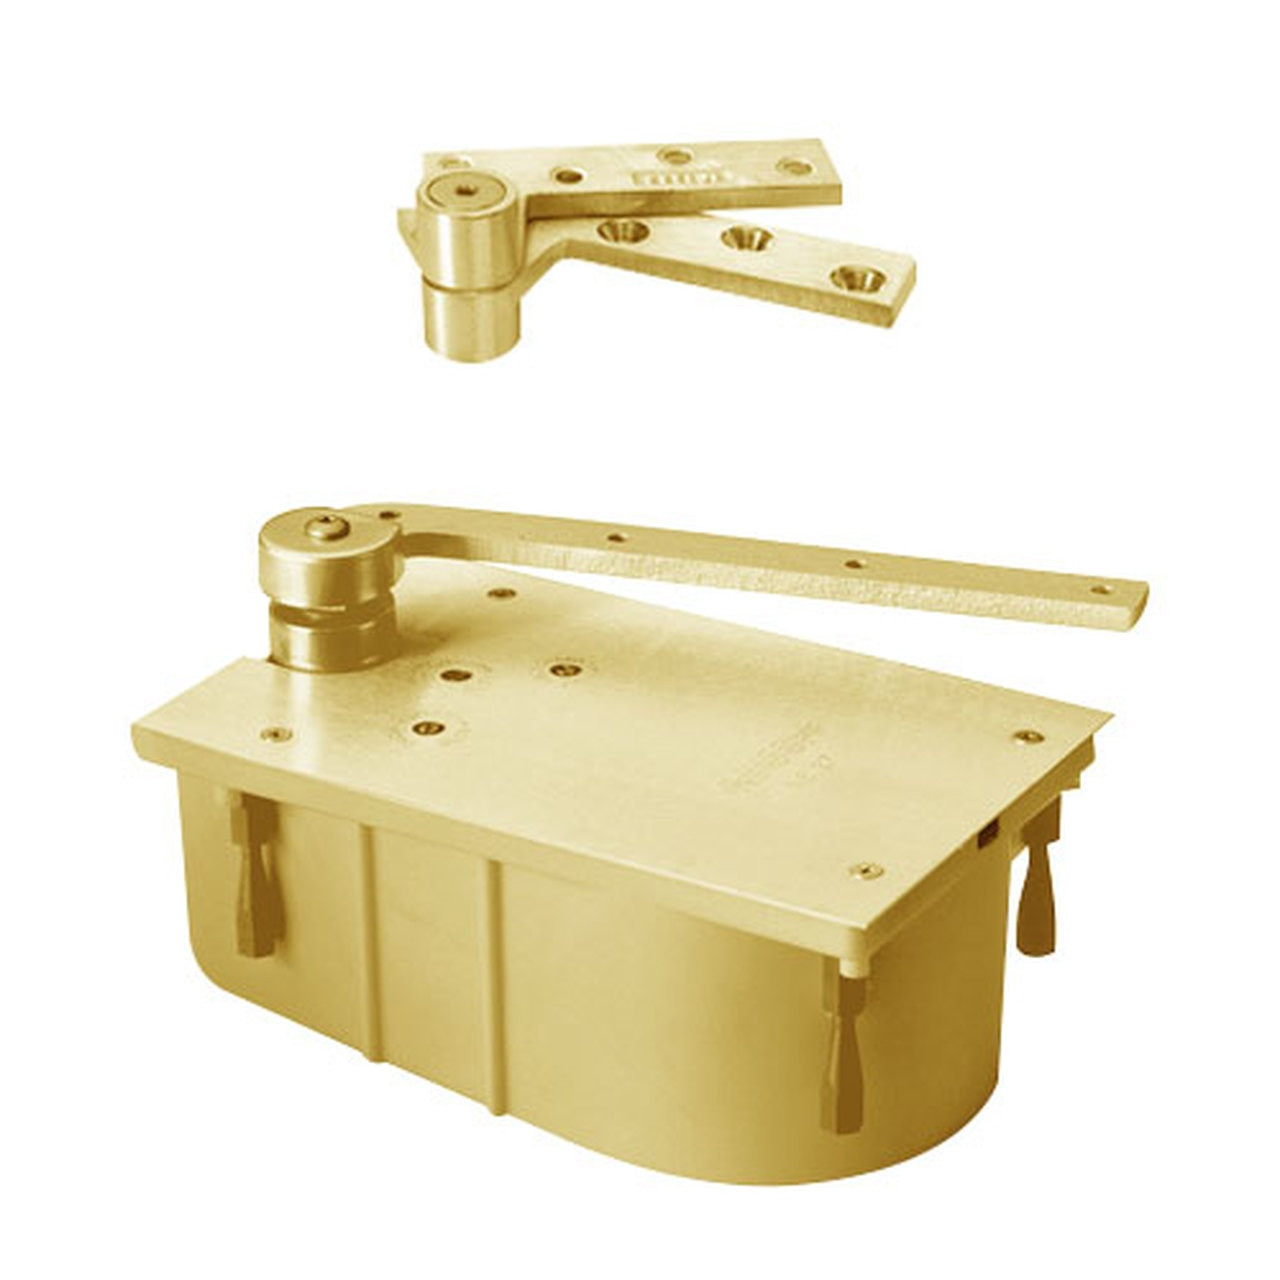 F127-85N-LFP-CWF-LH-606 Rixson 27 Series Fire Rated Heavy Duty 3/4" Offset Hung Floor Closer in Satin Brass Finish